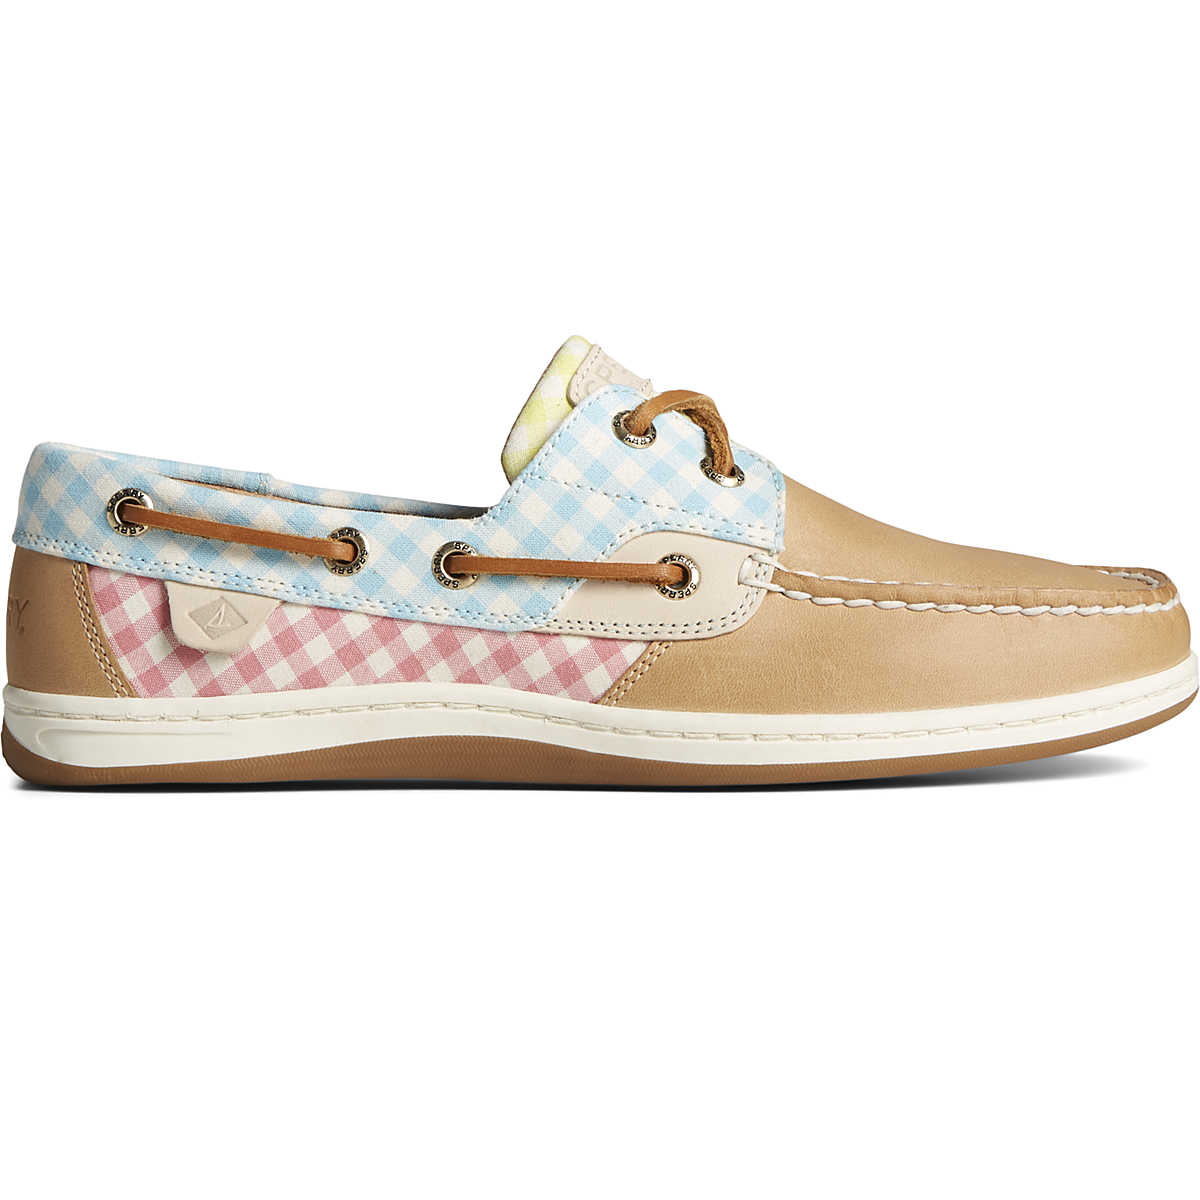 Koifish Gingham Boat Shoe, Multi Colored, dynamic 1